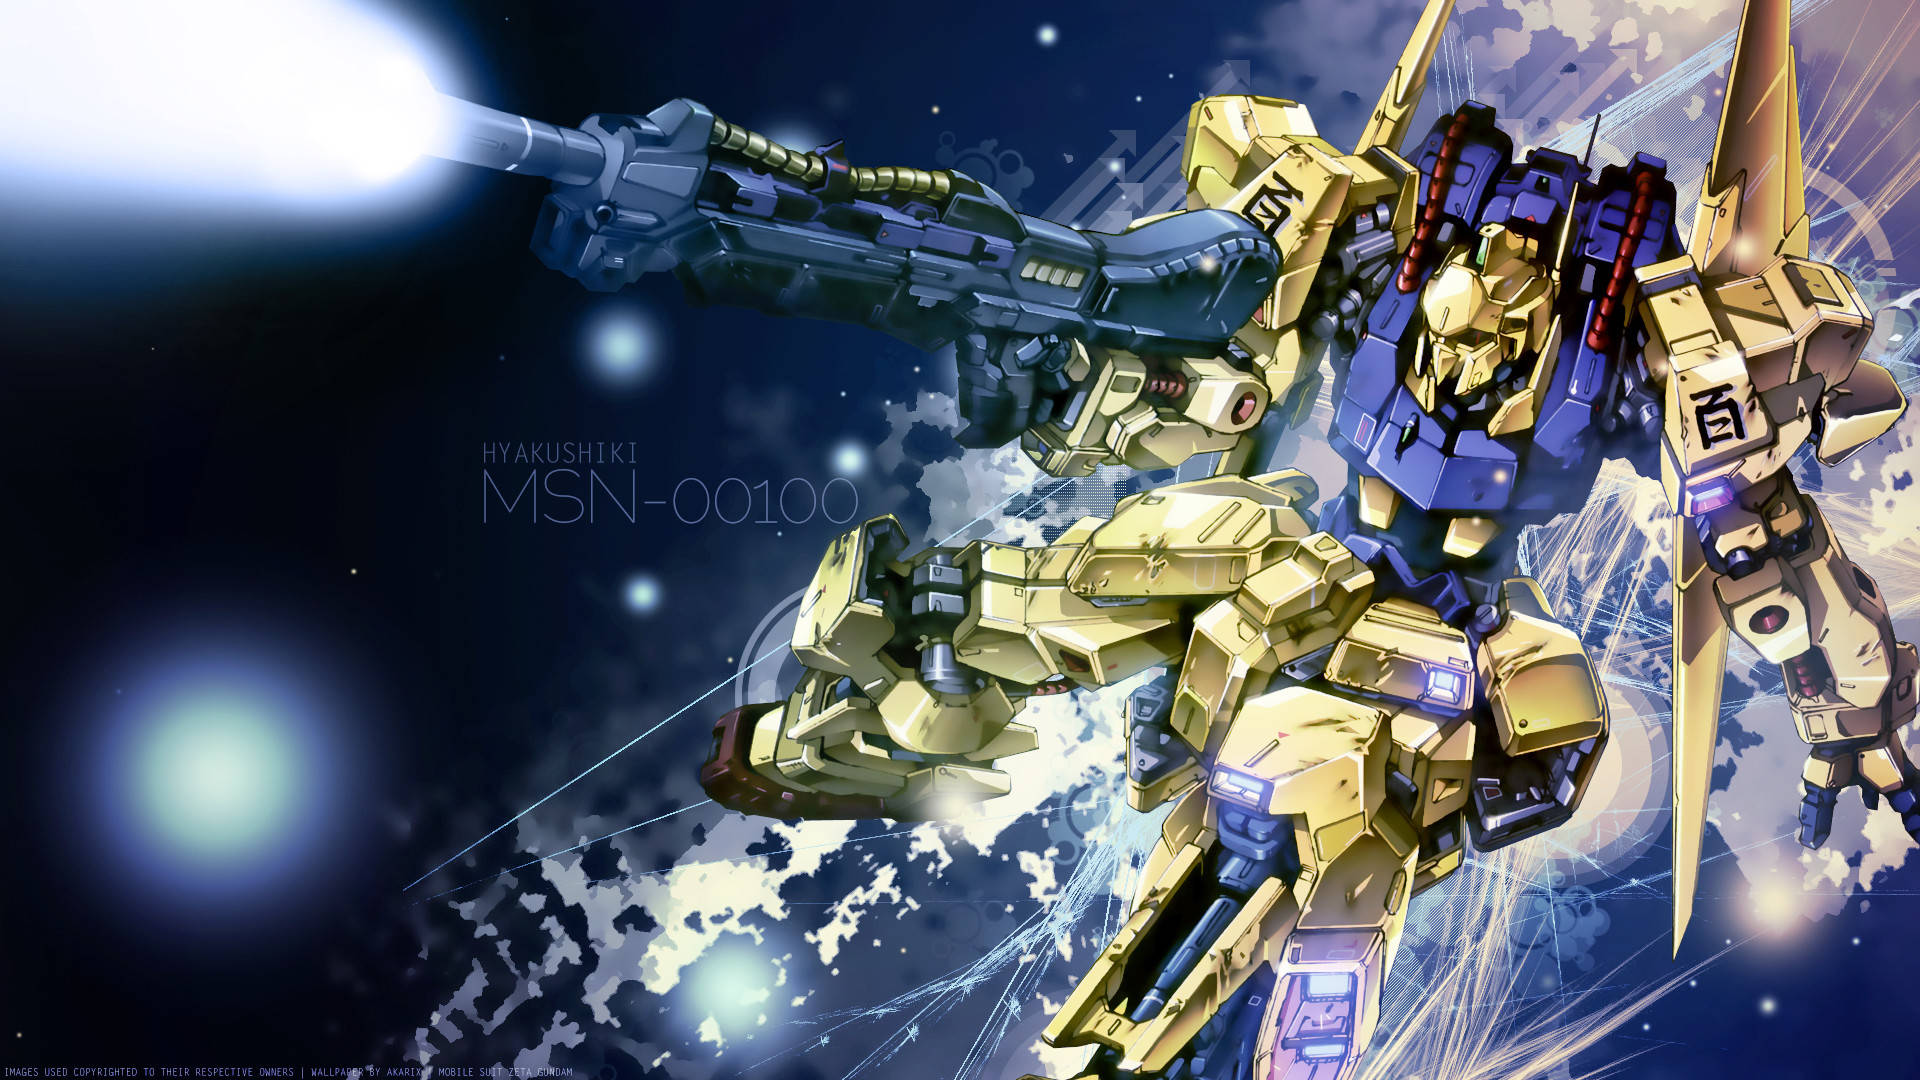 A mobile suit from the hit anime series, Gundam Zeta Wallpaper